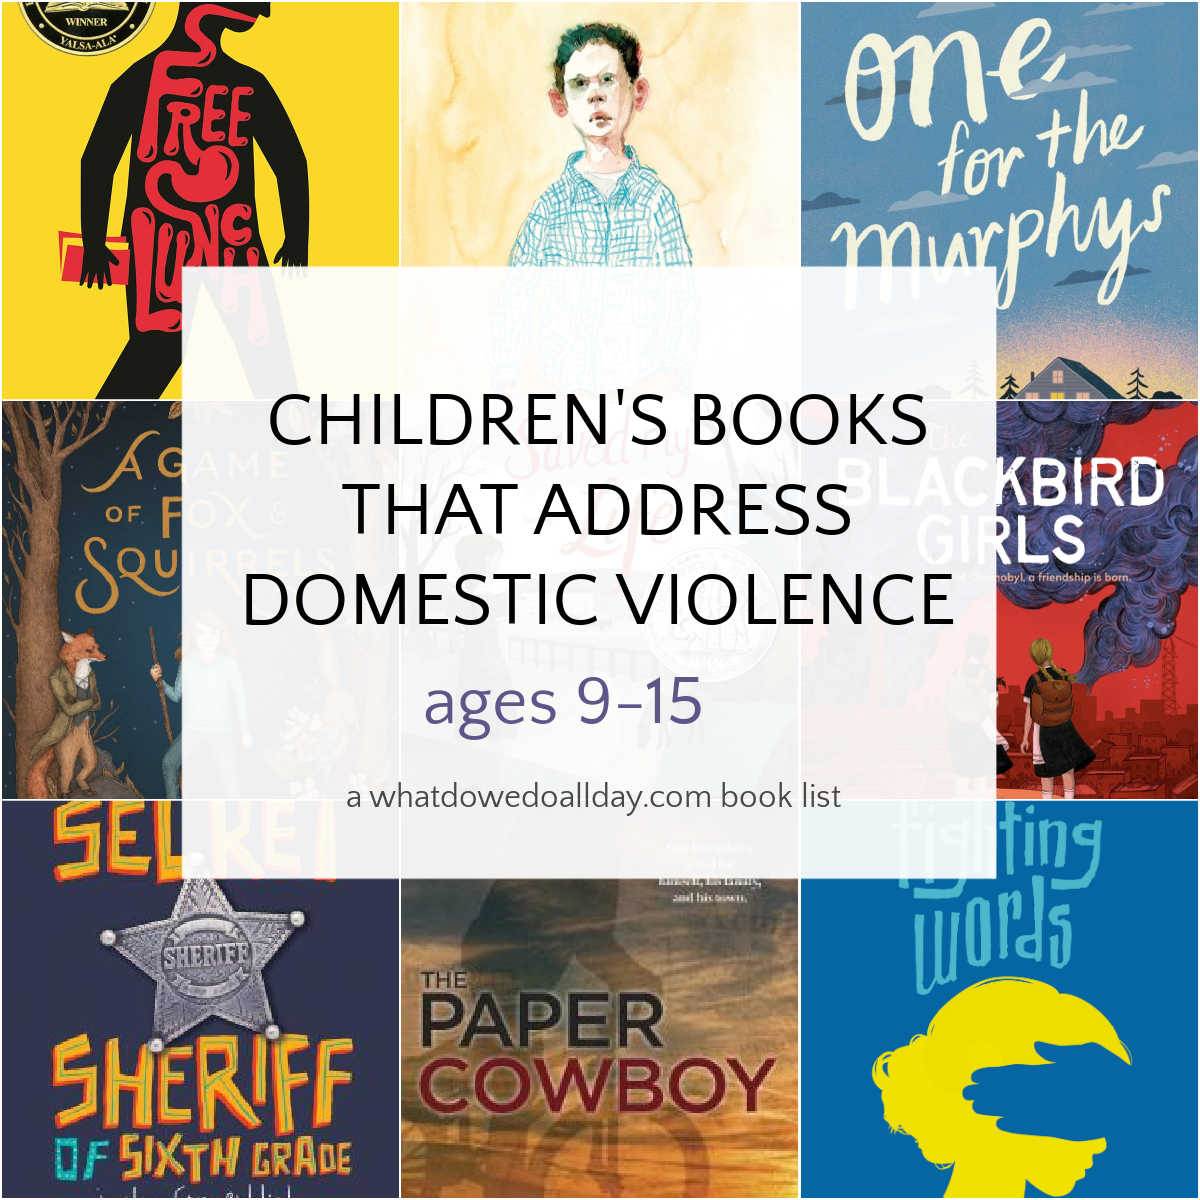 Collection of children's books that address domestic violence